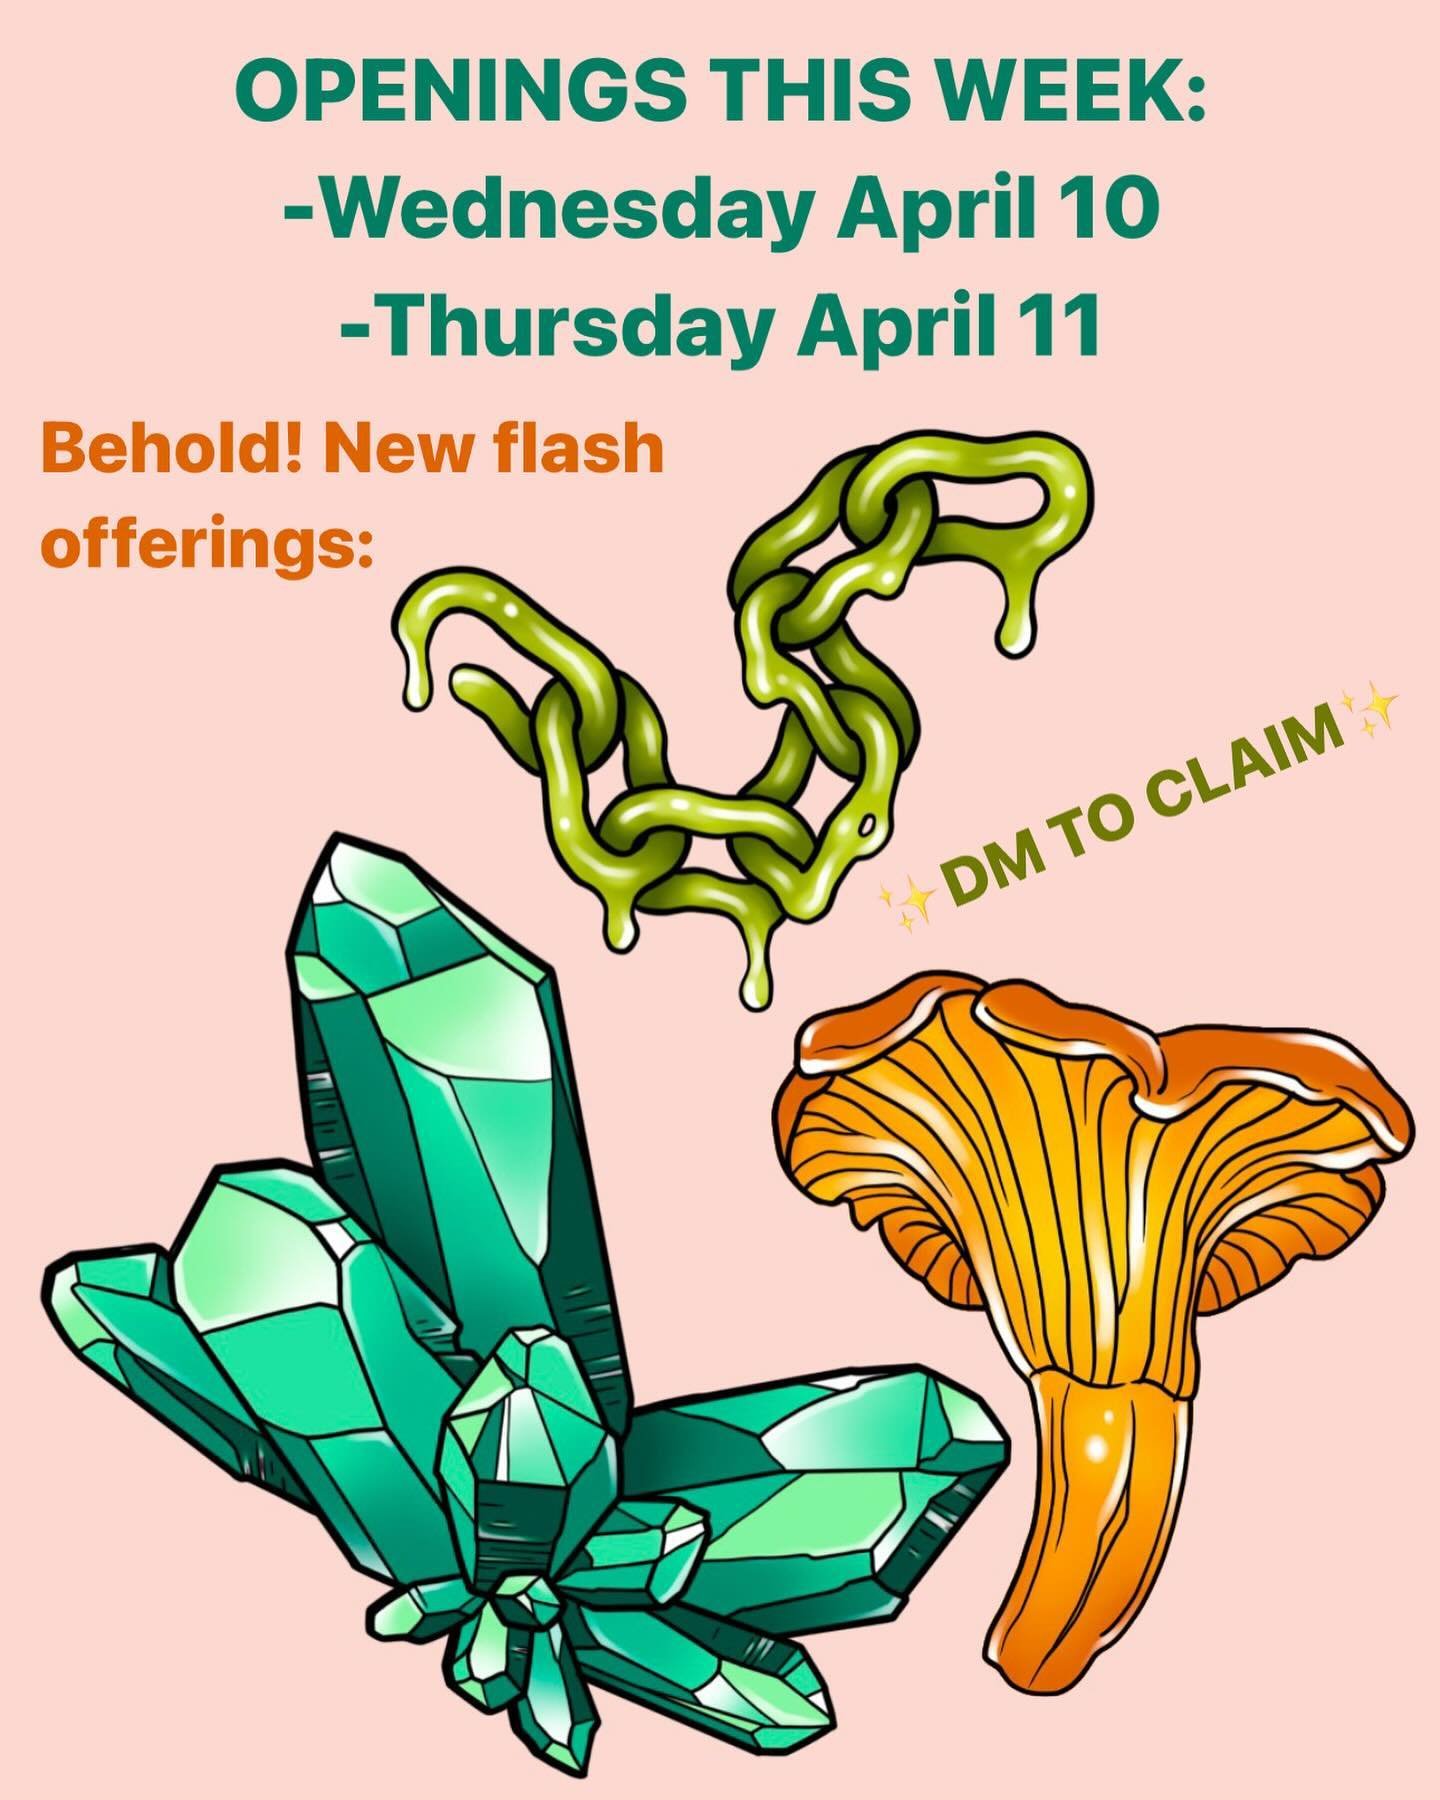 LAST-MINUTE FLASH OPENINGS THIS WEEK
-Wednesday April 10
-Thursday April 11
&hellip;
✨New flash offerings as well as some I haven&rsquo;t done yet or am excited to do more of!!
✨Start time 1-4pm, depending on piece
✨Small custom maybe accepted if eno